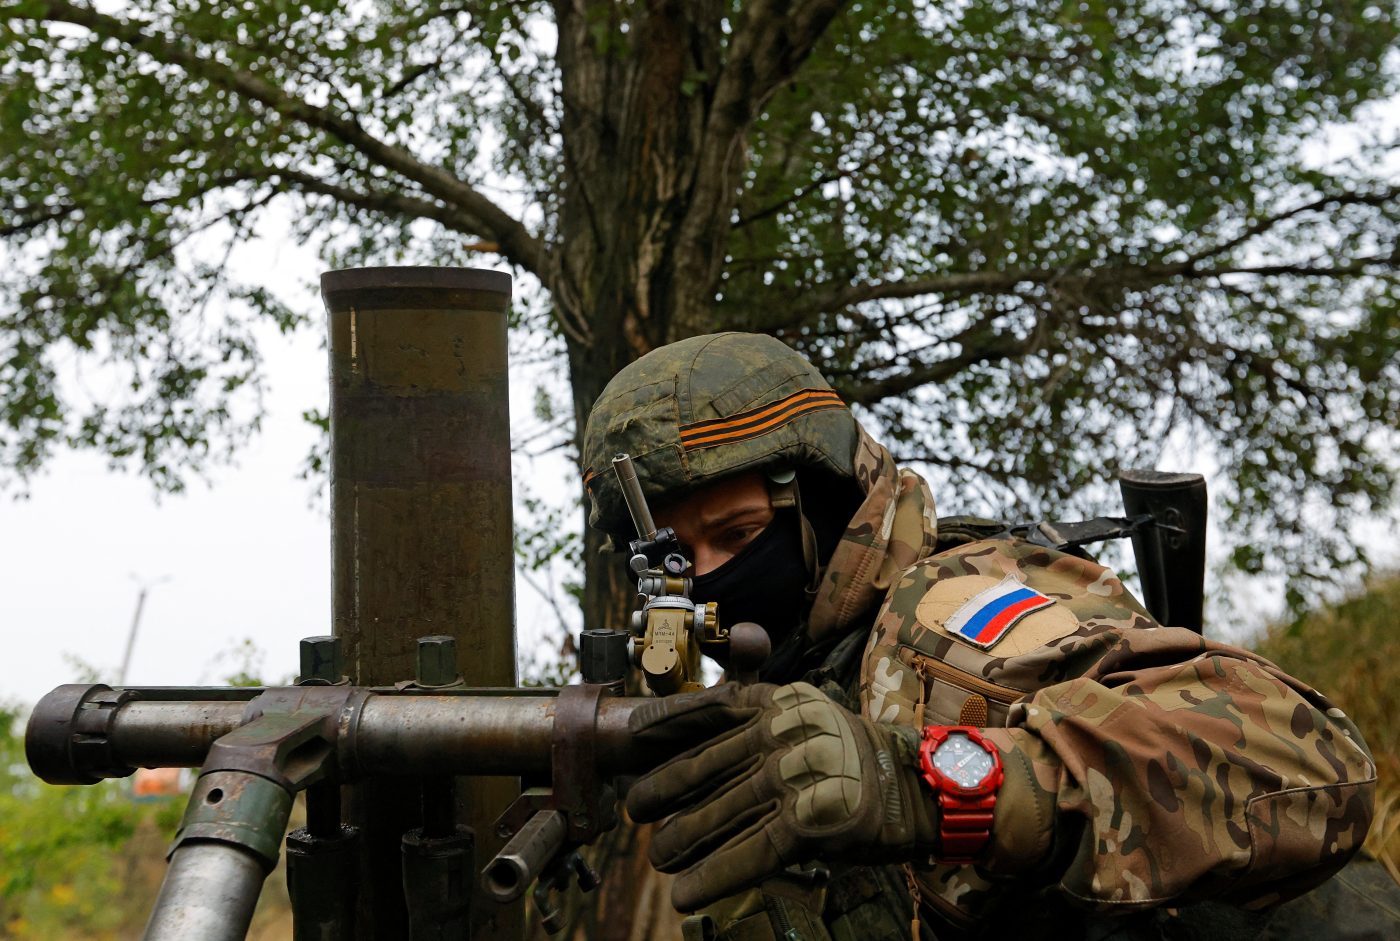 Photo: A service member of pro-Russian troops fires a mortar in the direction of Avdiivka during Russia-Ukraine conflict, outside Donetsk, Ukraine September 17, 2022. Credit: REUTERS/Alexander Ermochenko